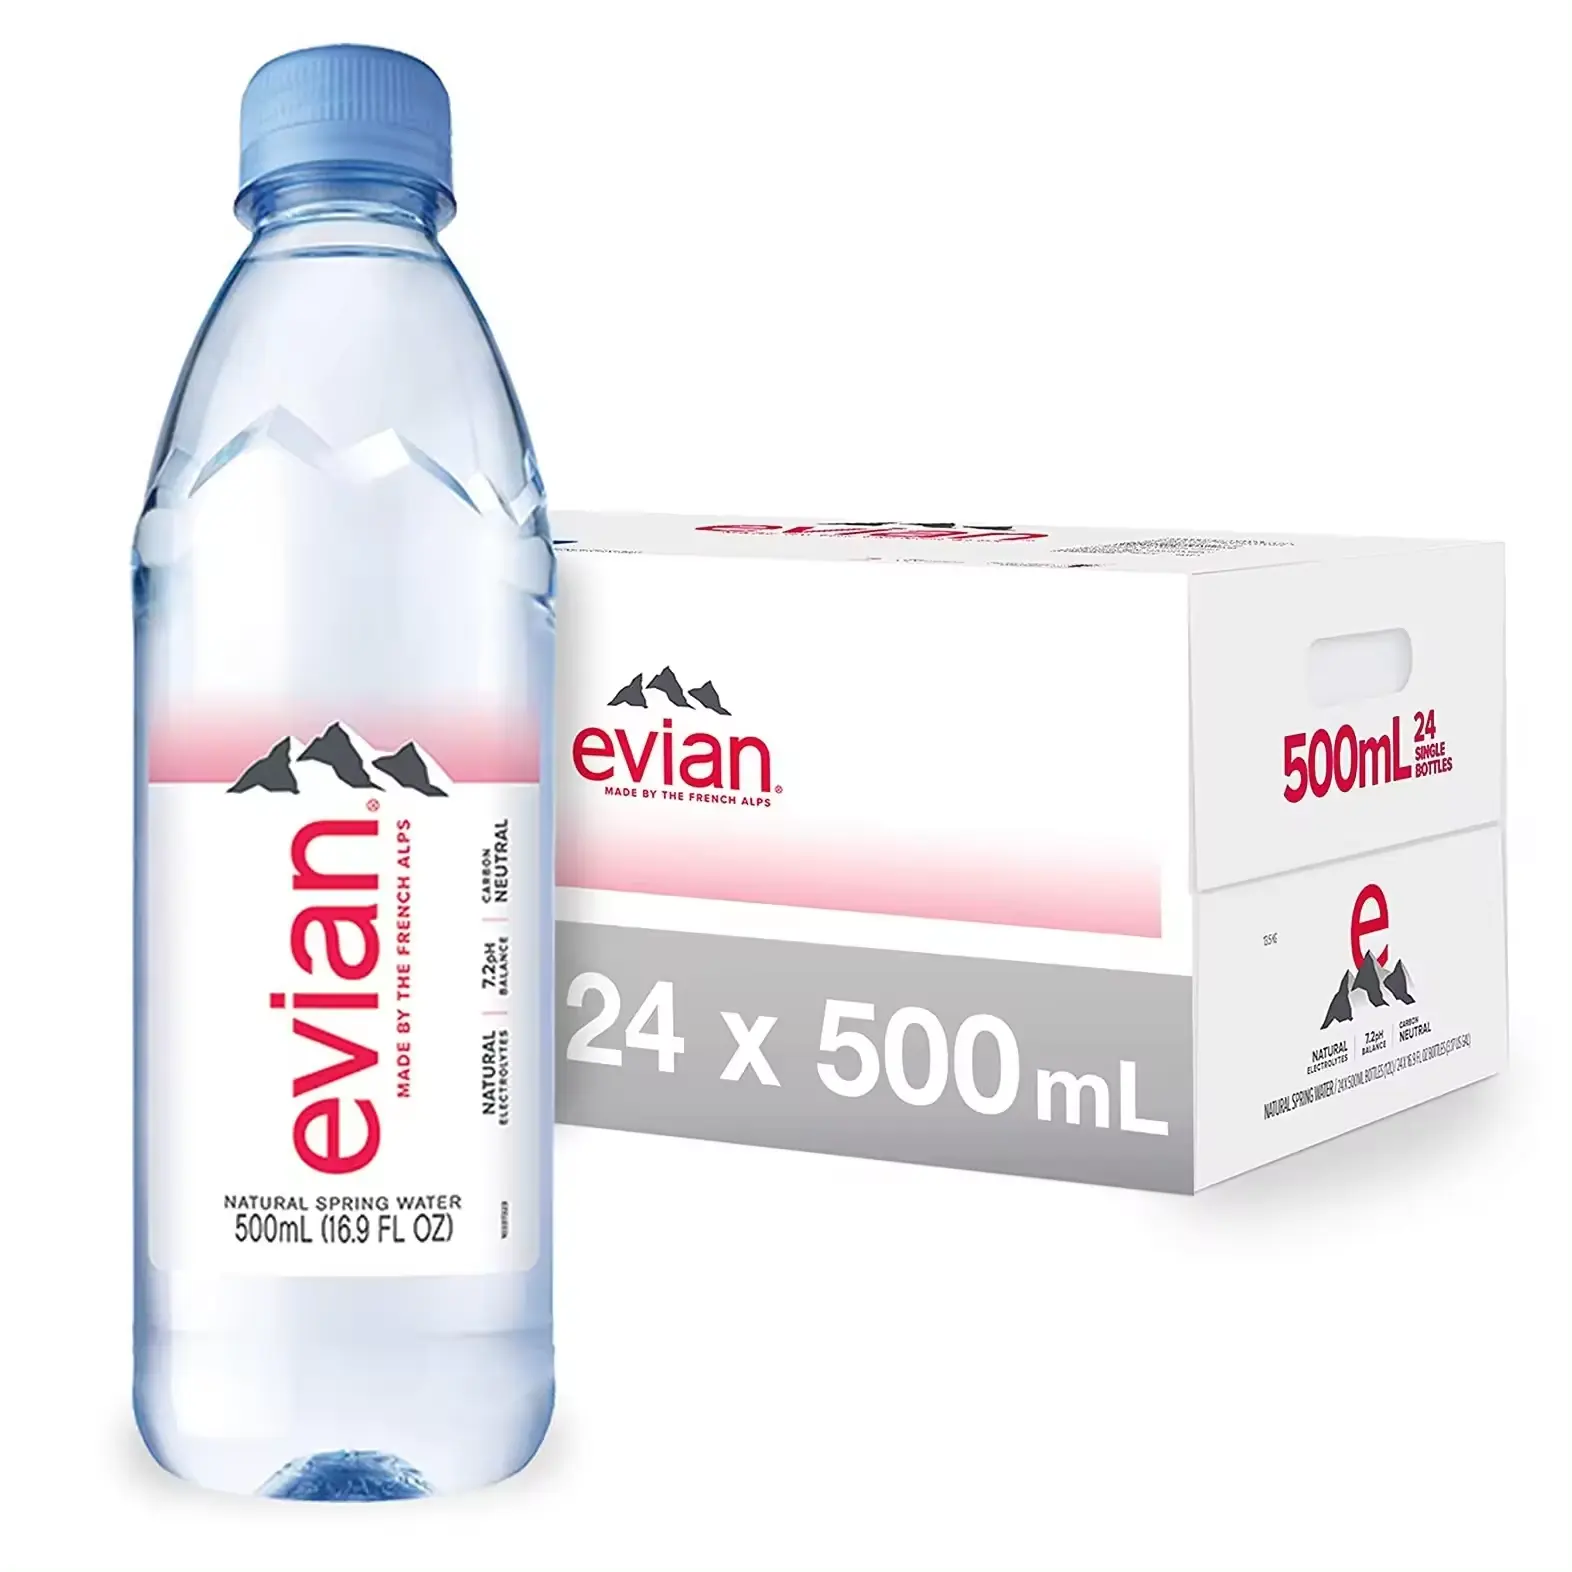 Evian Natural Spring Water (1.5L / 12pk),Prices for evian wholesale bottled water,Evian mineral water